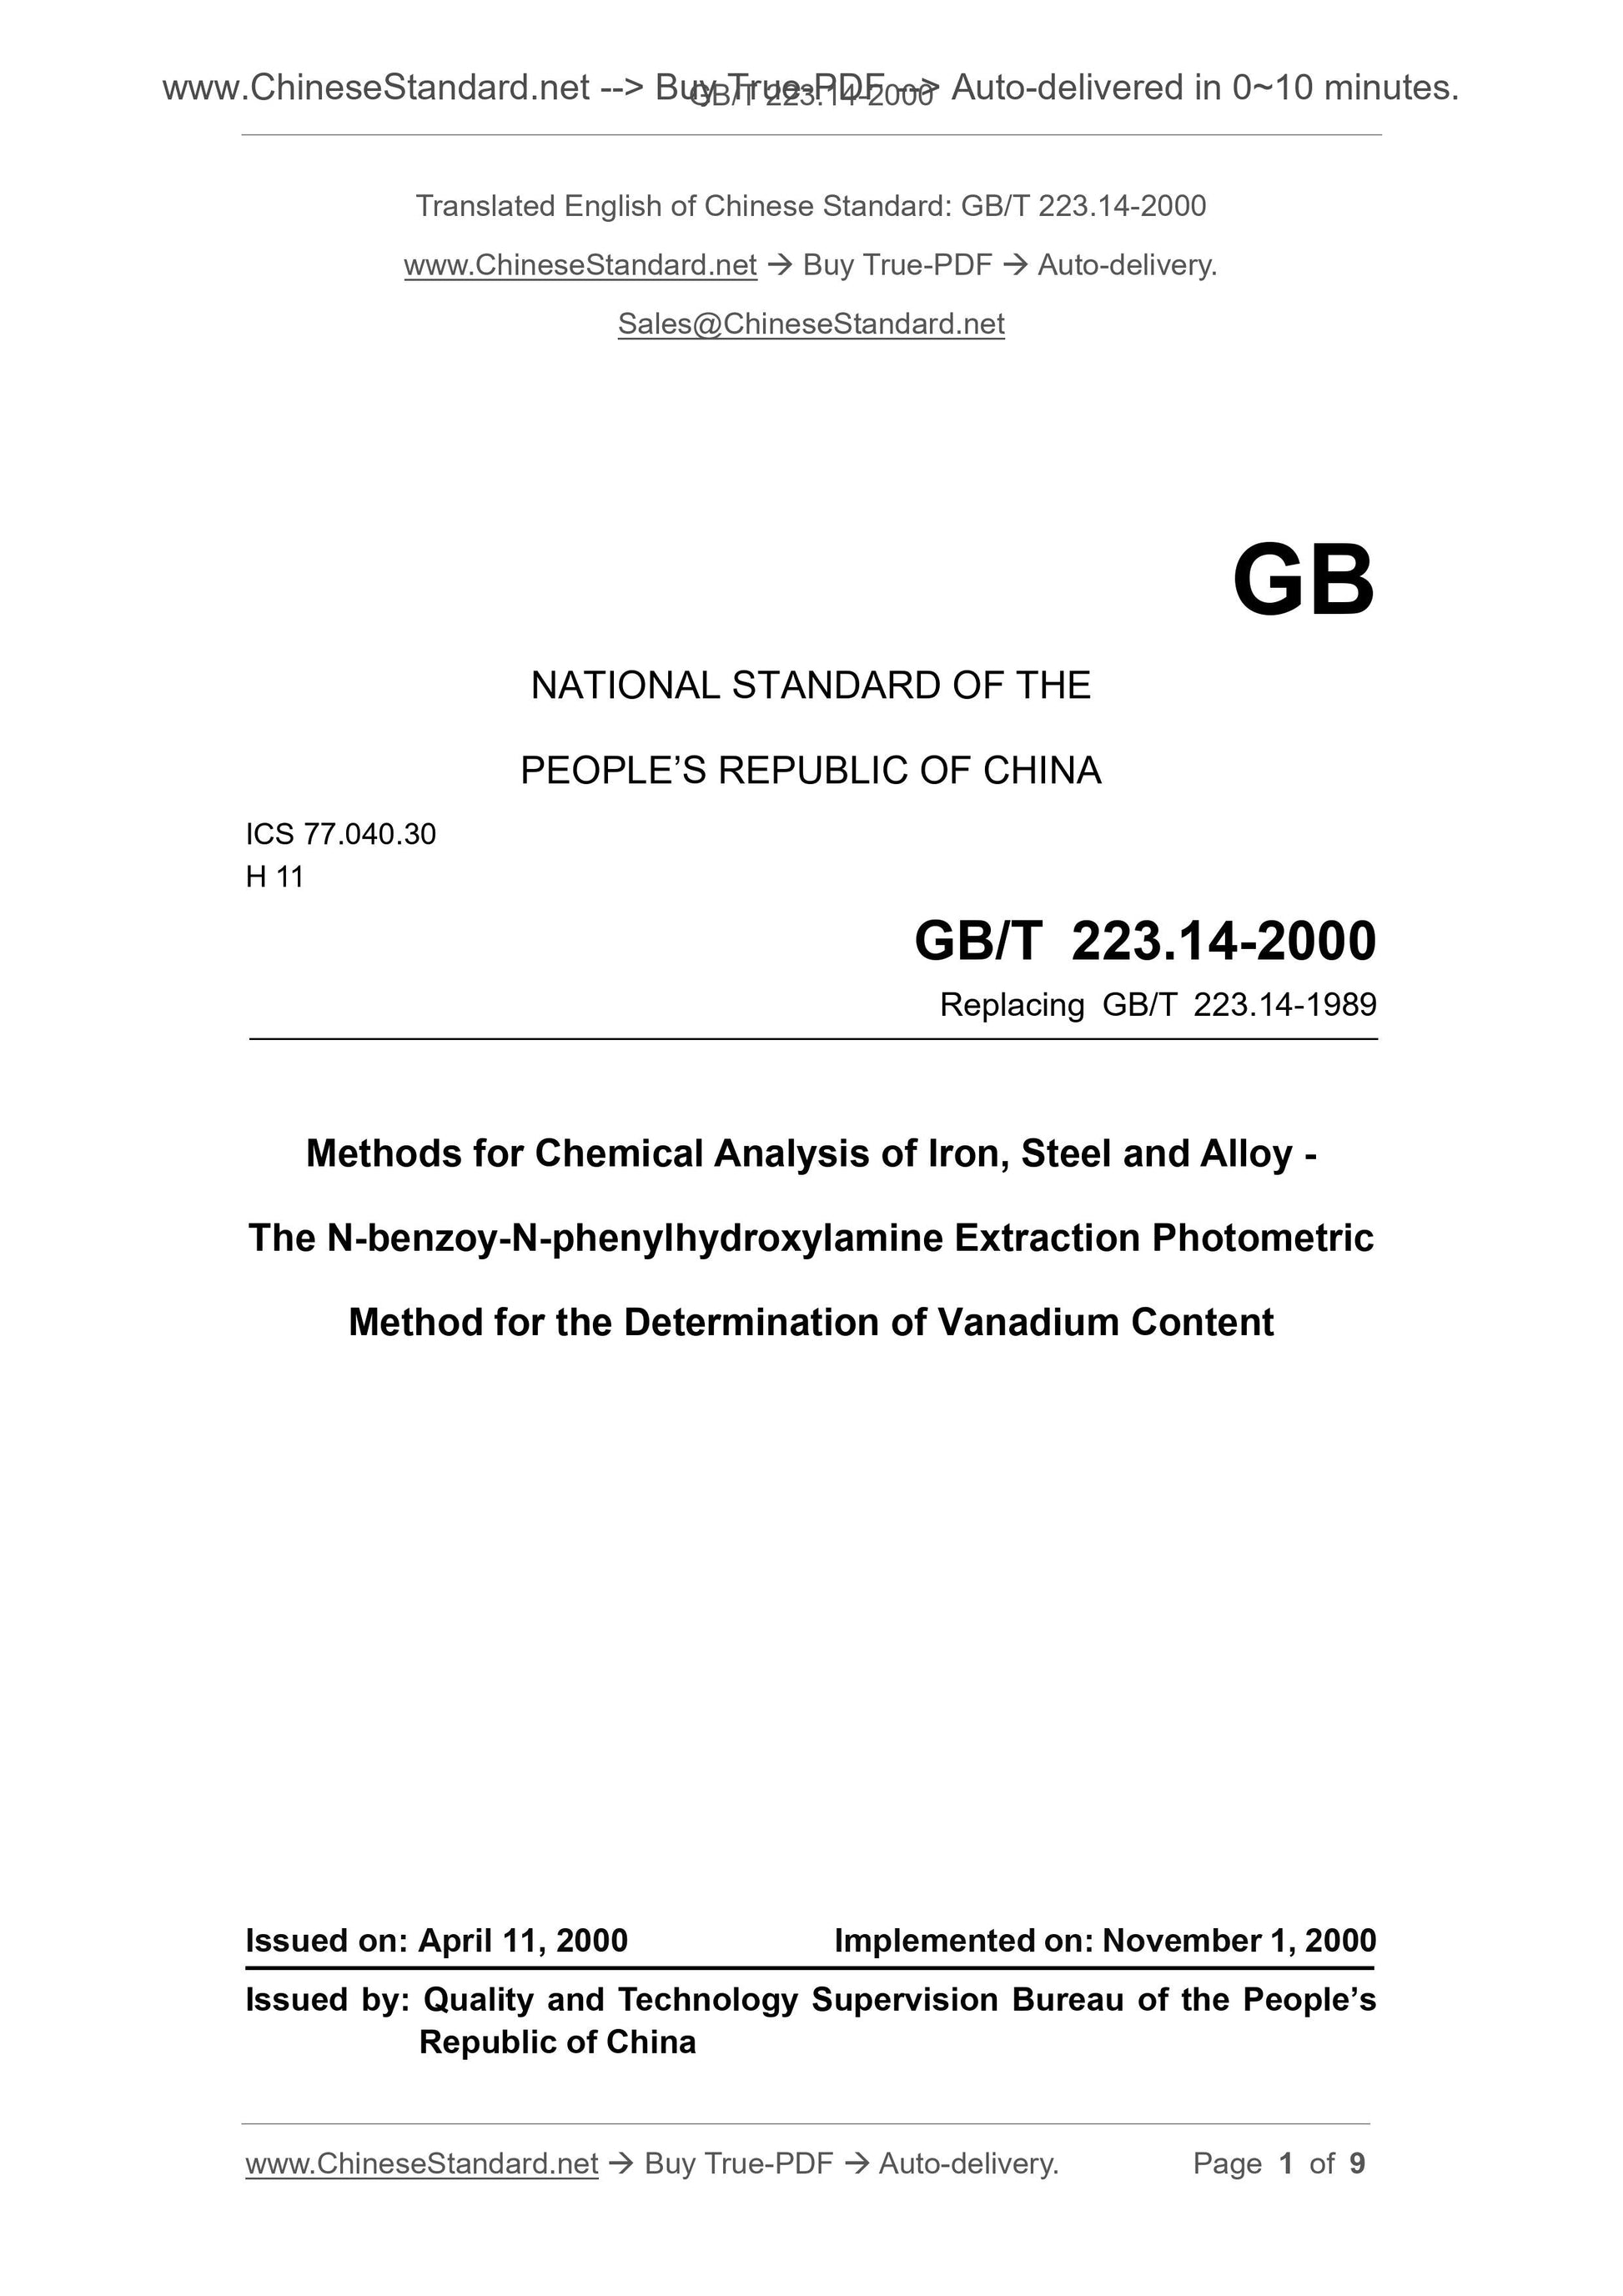 GB/T 223.14-2000 Page 1